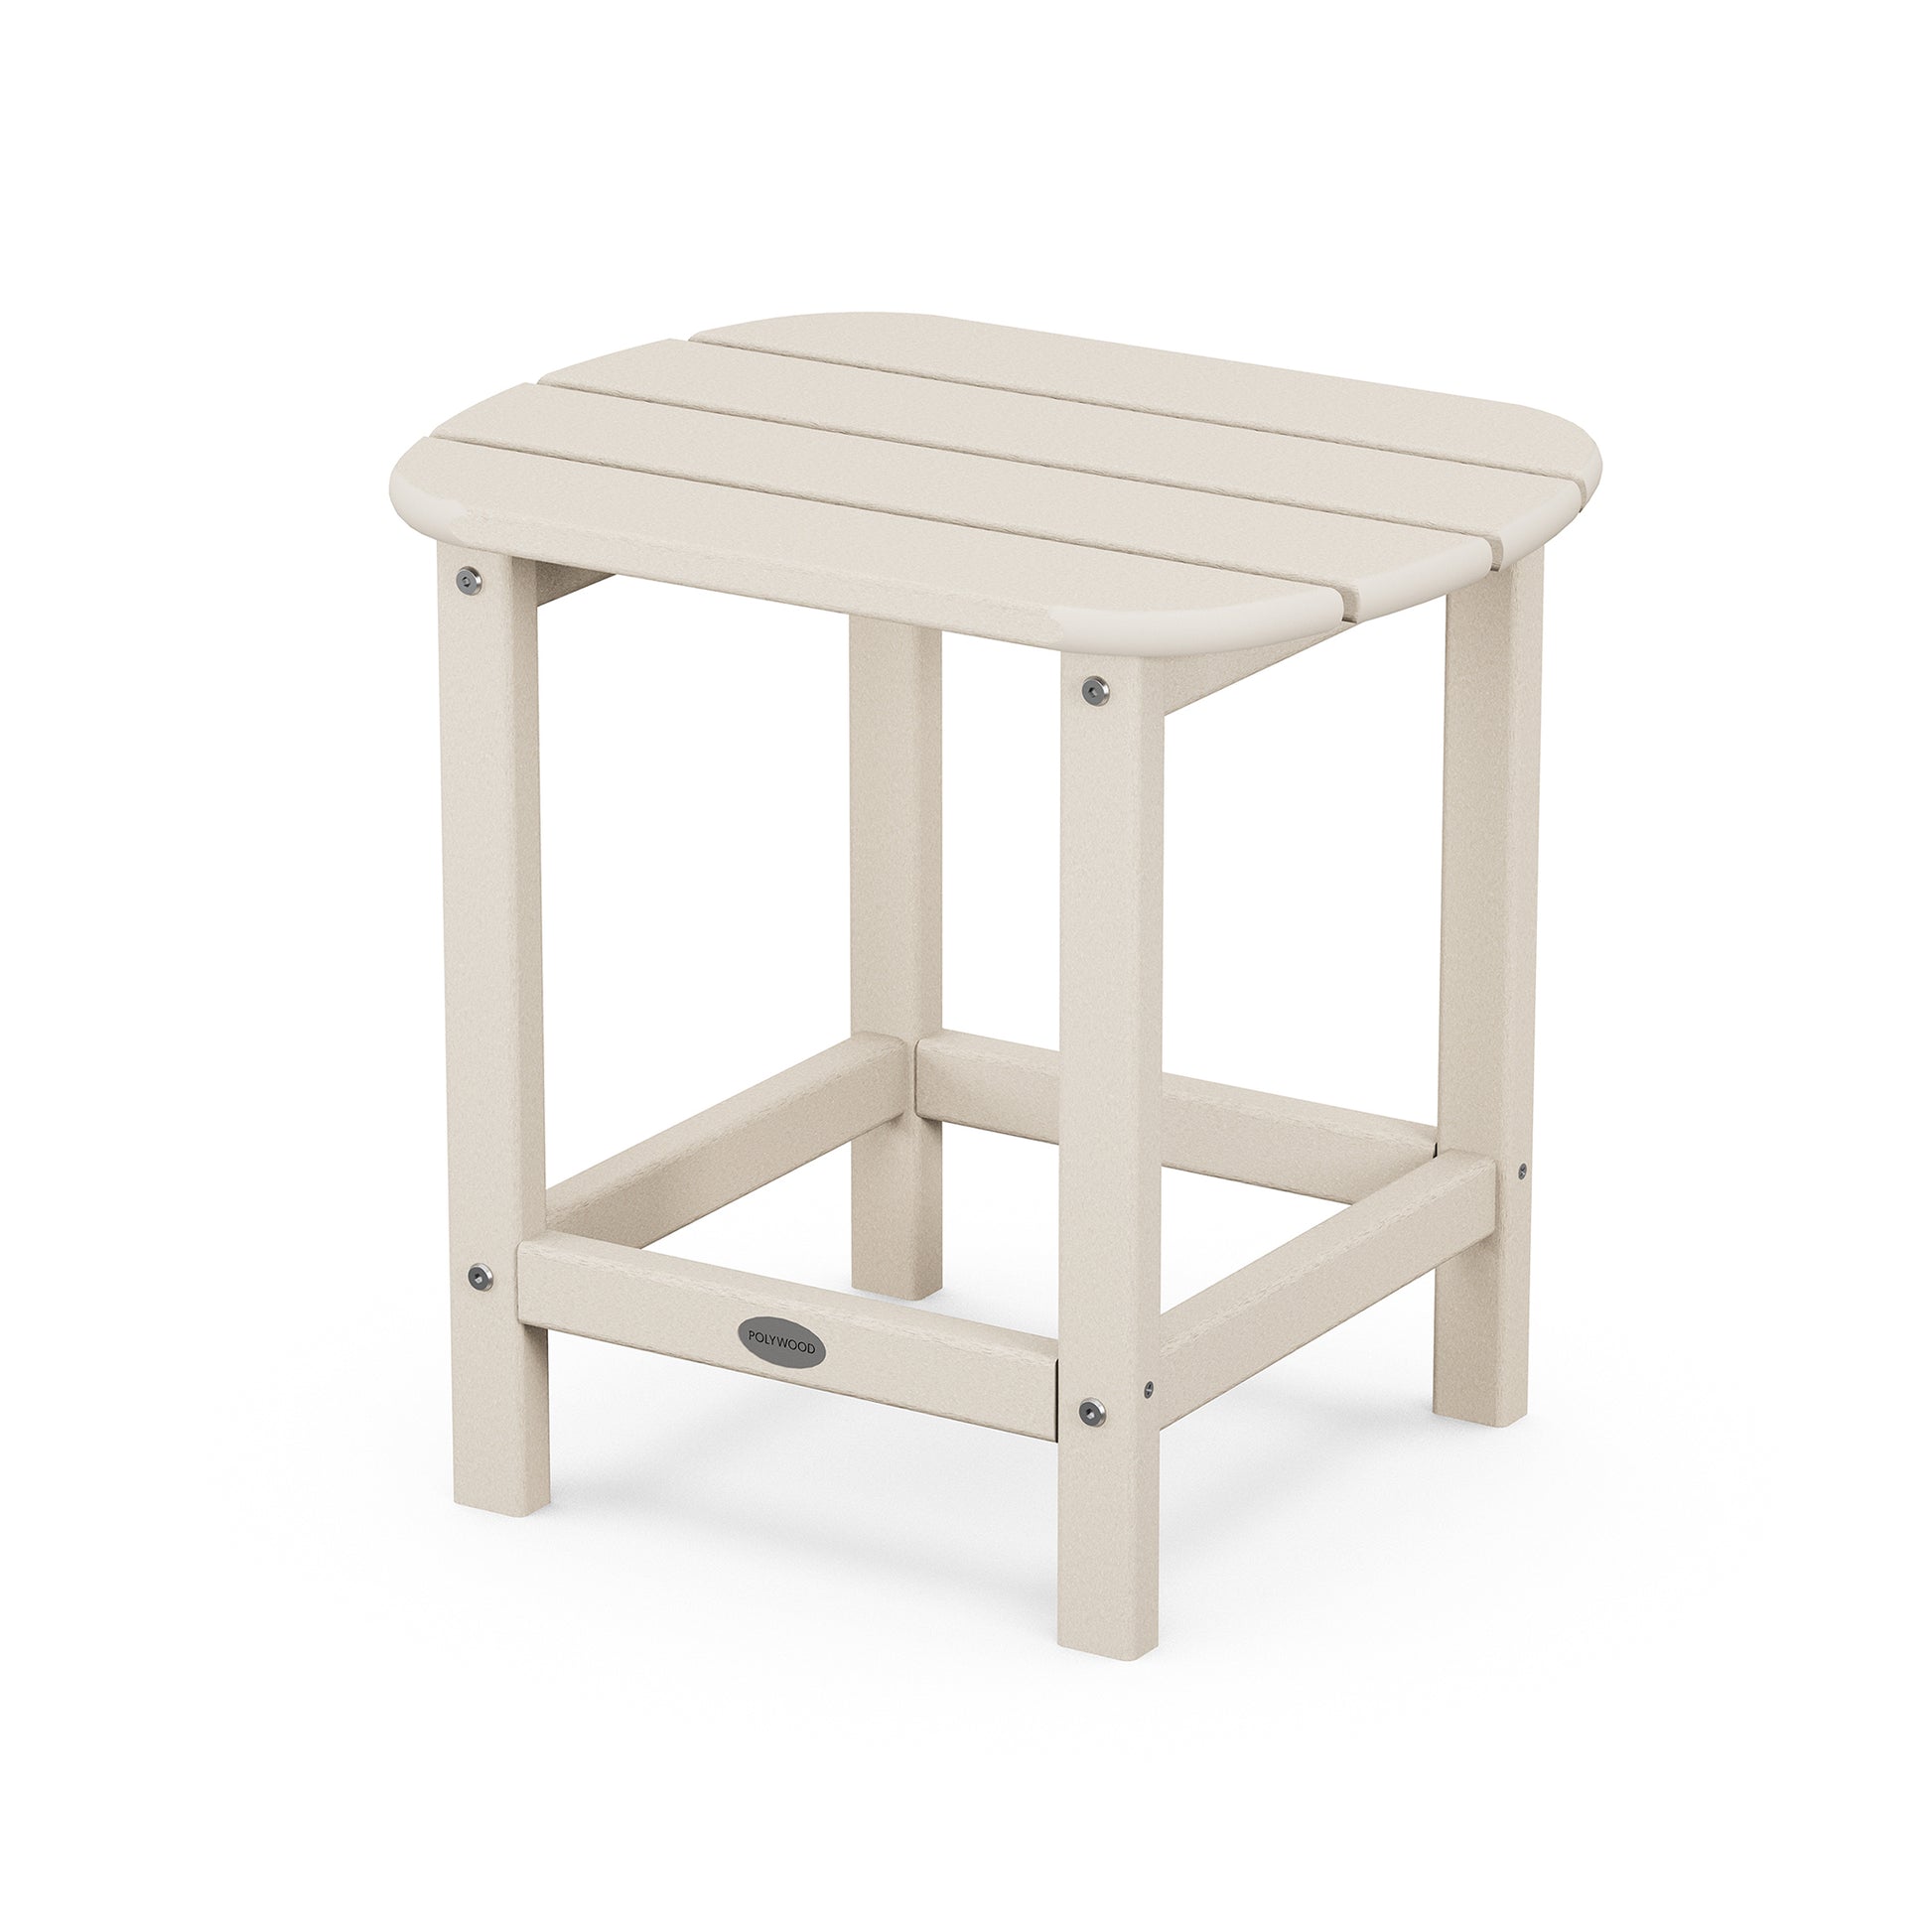 A small, beige POLYWOOD South Beach Adirondack 18" Side Table with a simple design and sturdy legs, isolated on a white background.